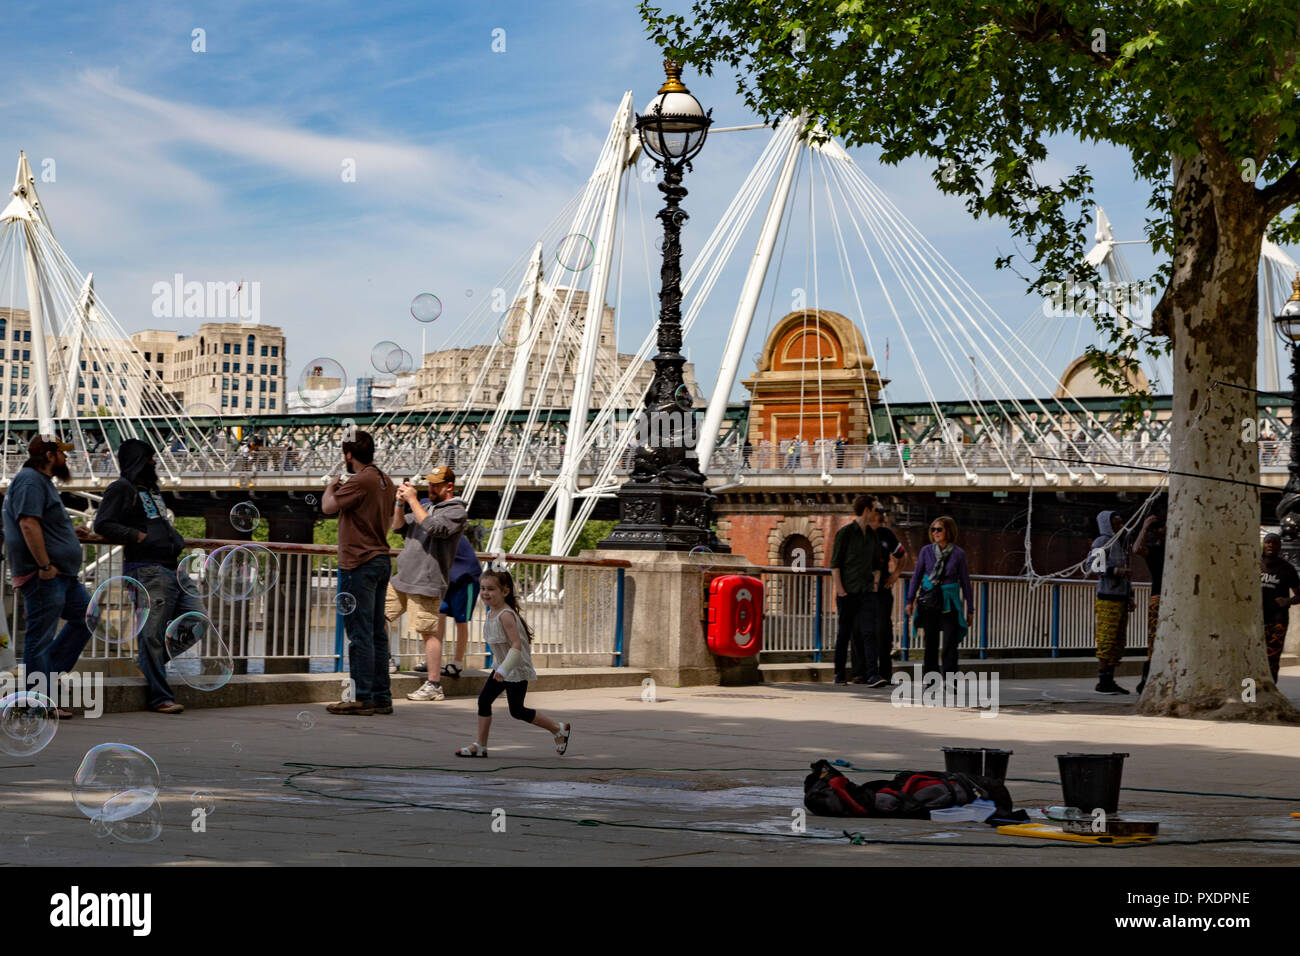 Young girl chasing soap ballons with Hungerford Bridge in the background, London, UK Stock Photo